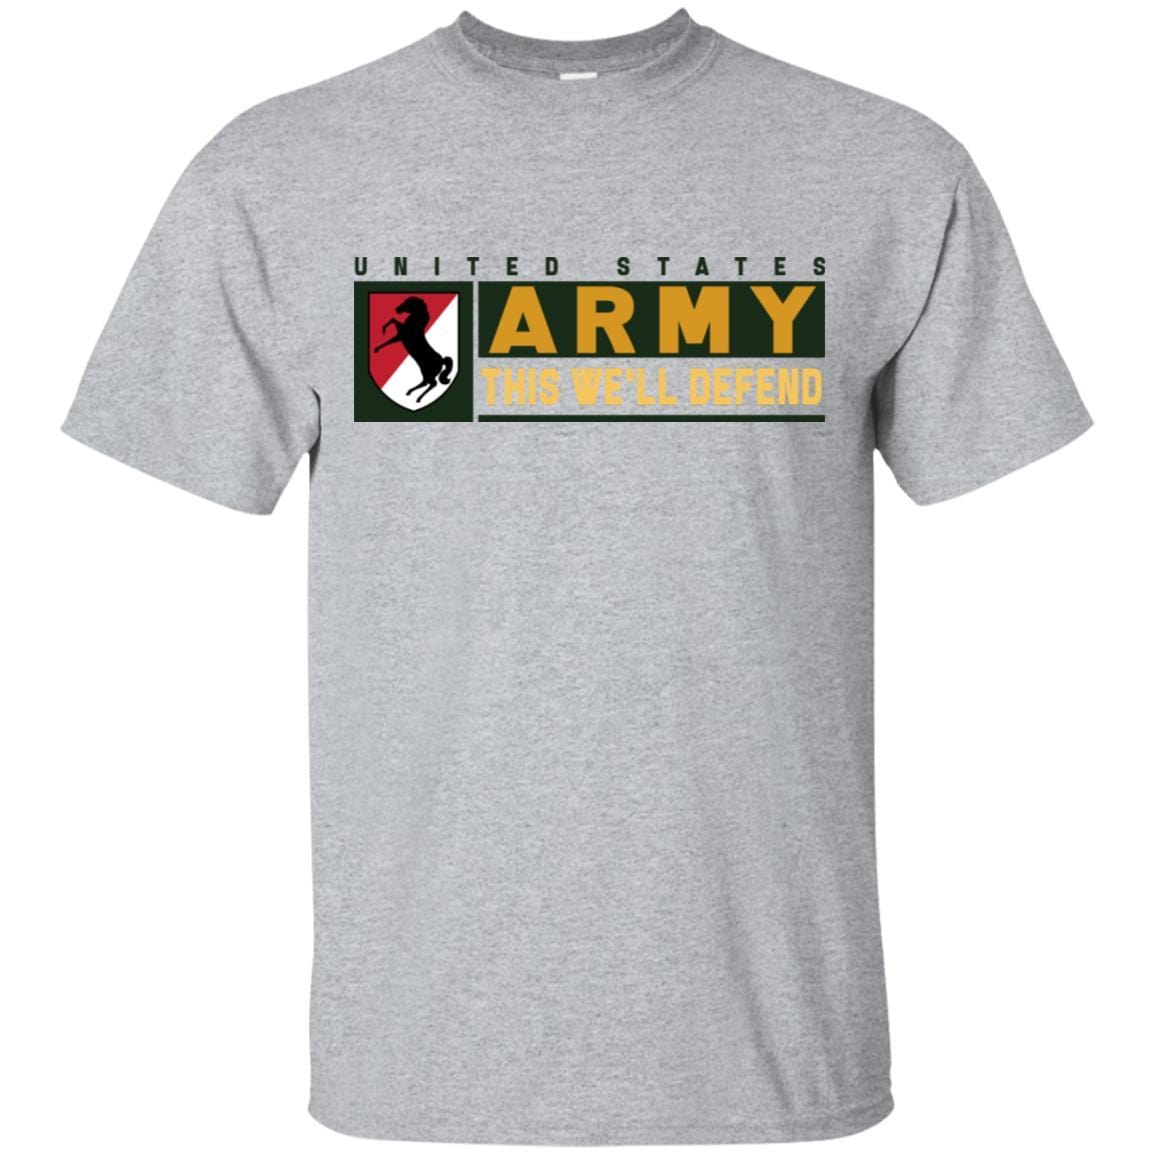 US Army 11TH ARMORED CAVALRY REGIMENT- This We'll Defend T-Shirt On Front For Men-TShirt-Army-Veterans Nation